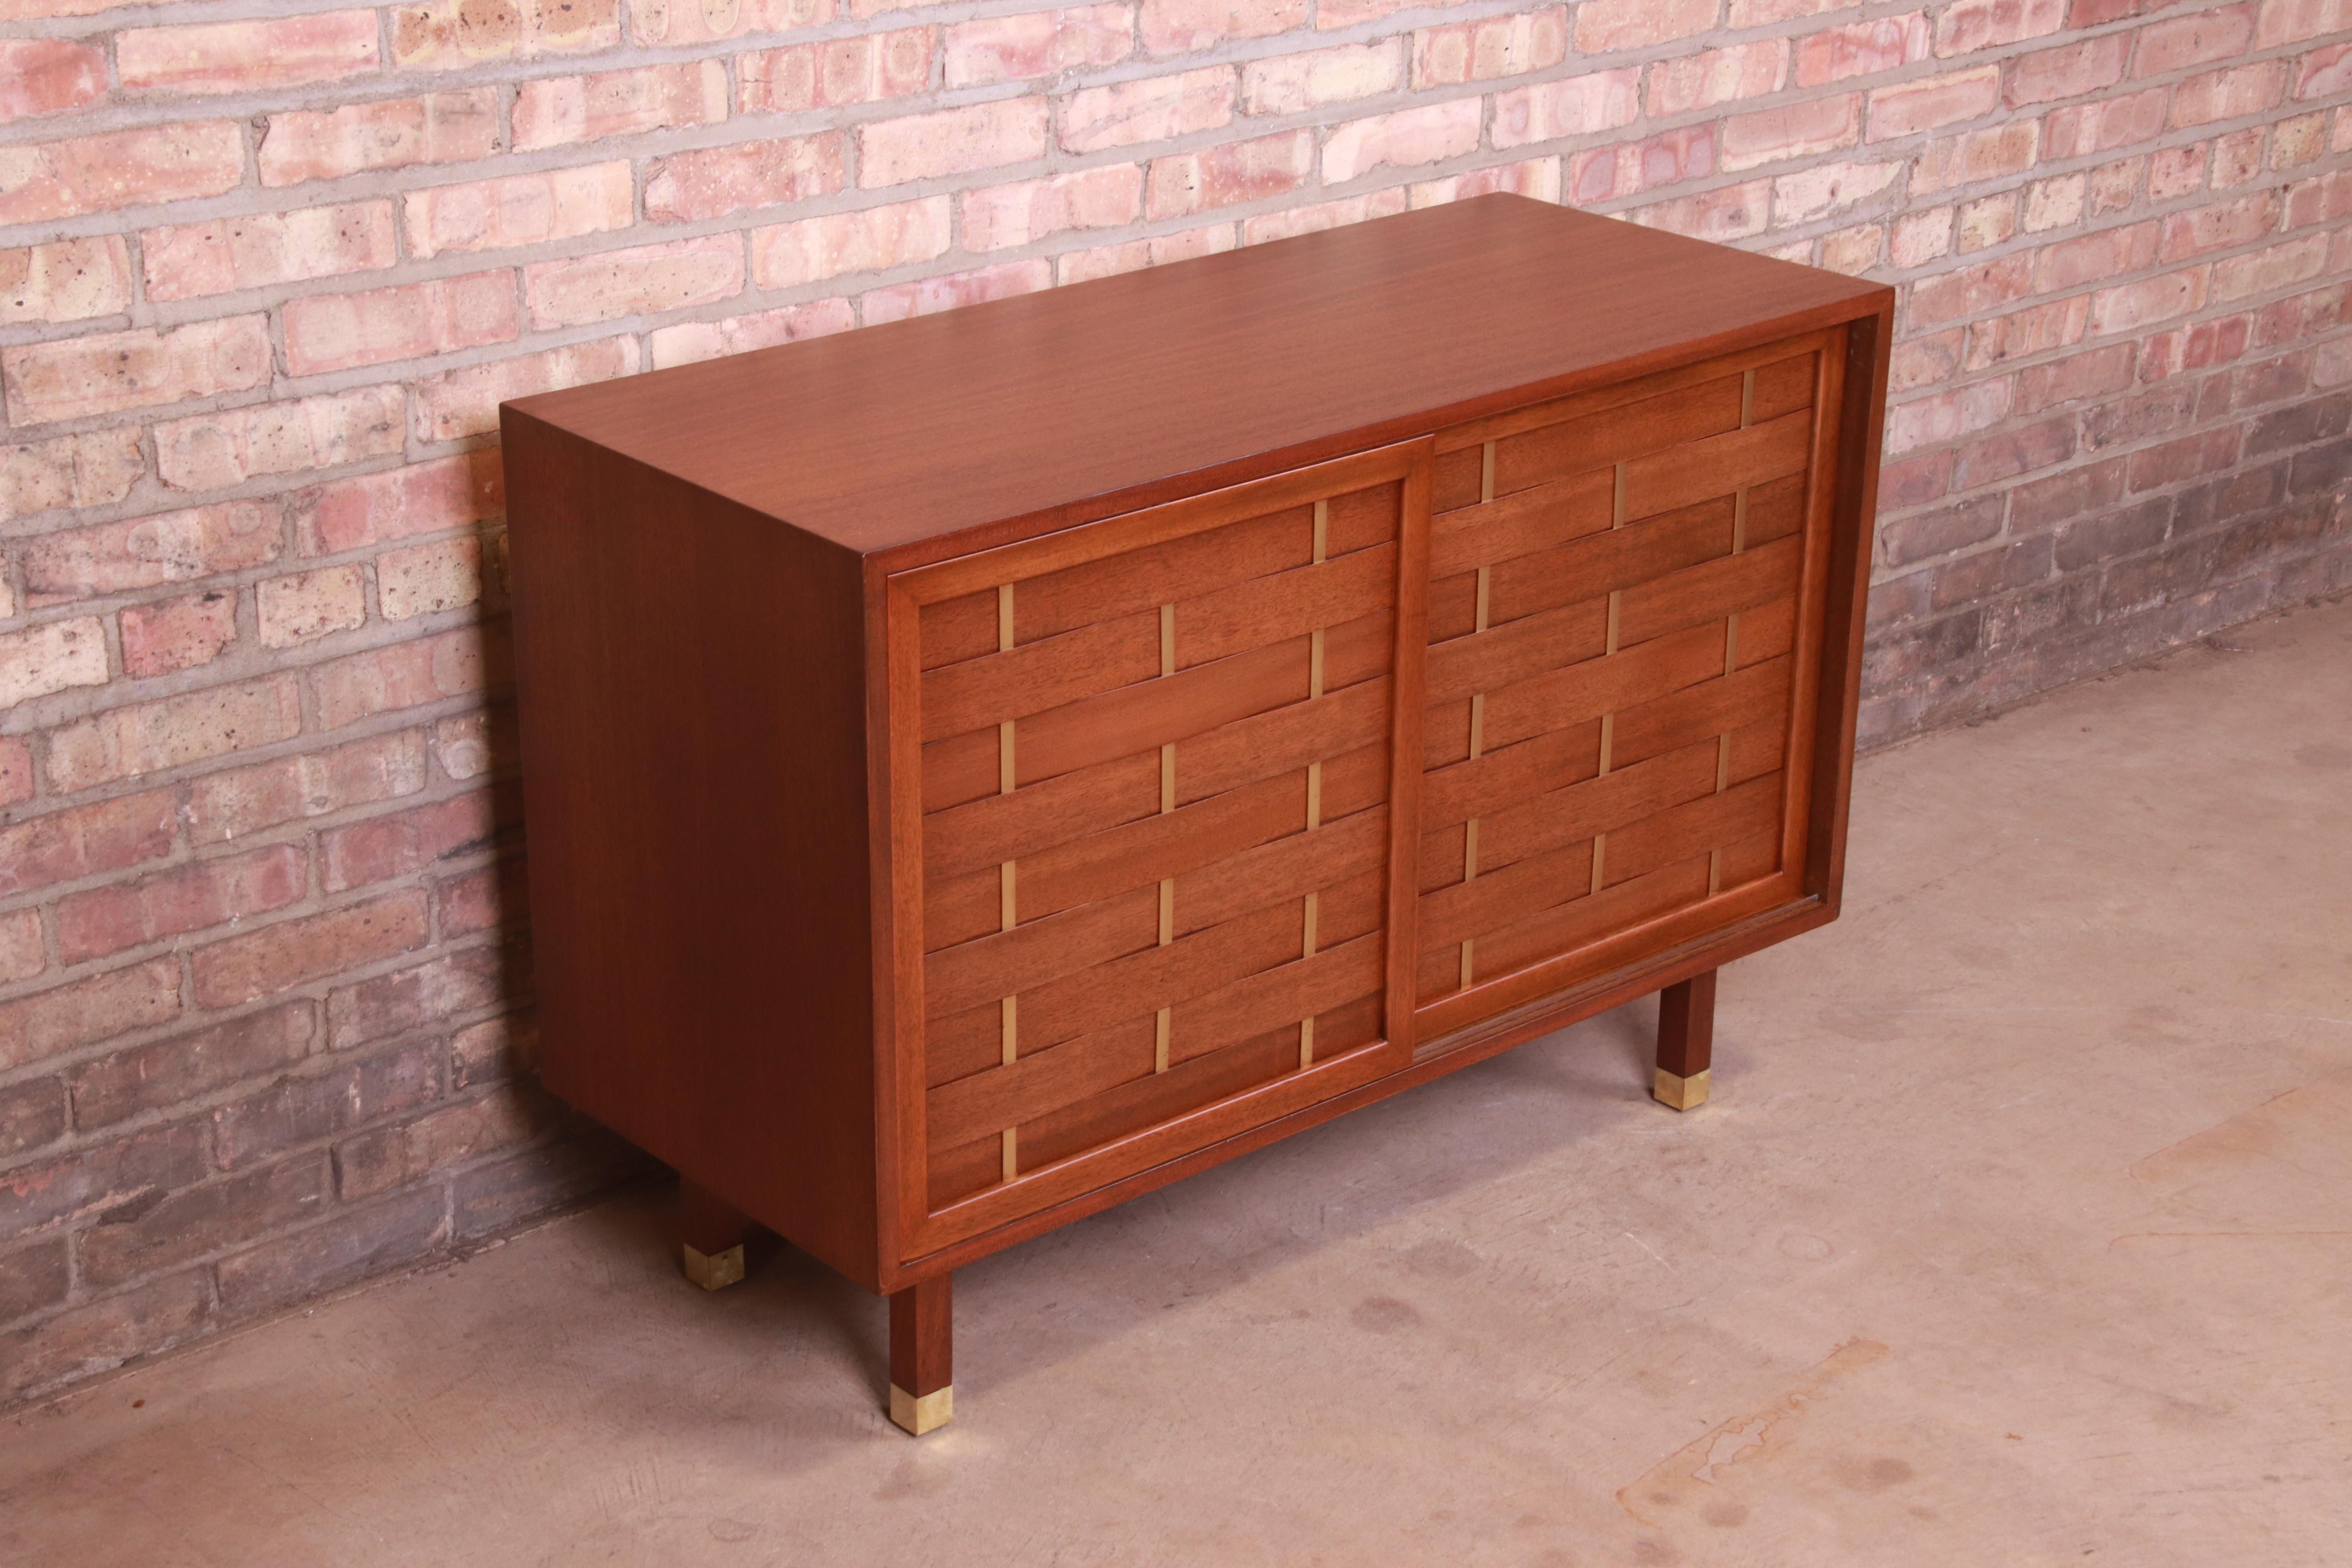 Mid-20th Century Harvey Probber Mahogany and Brass Woven Front Sliding Door Credenza, Refinished